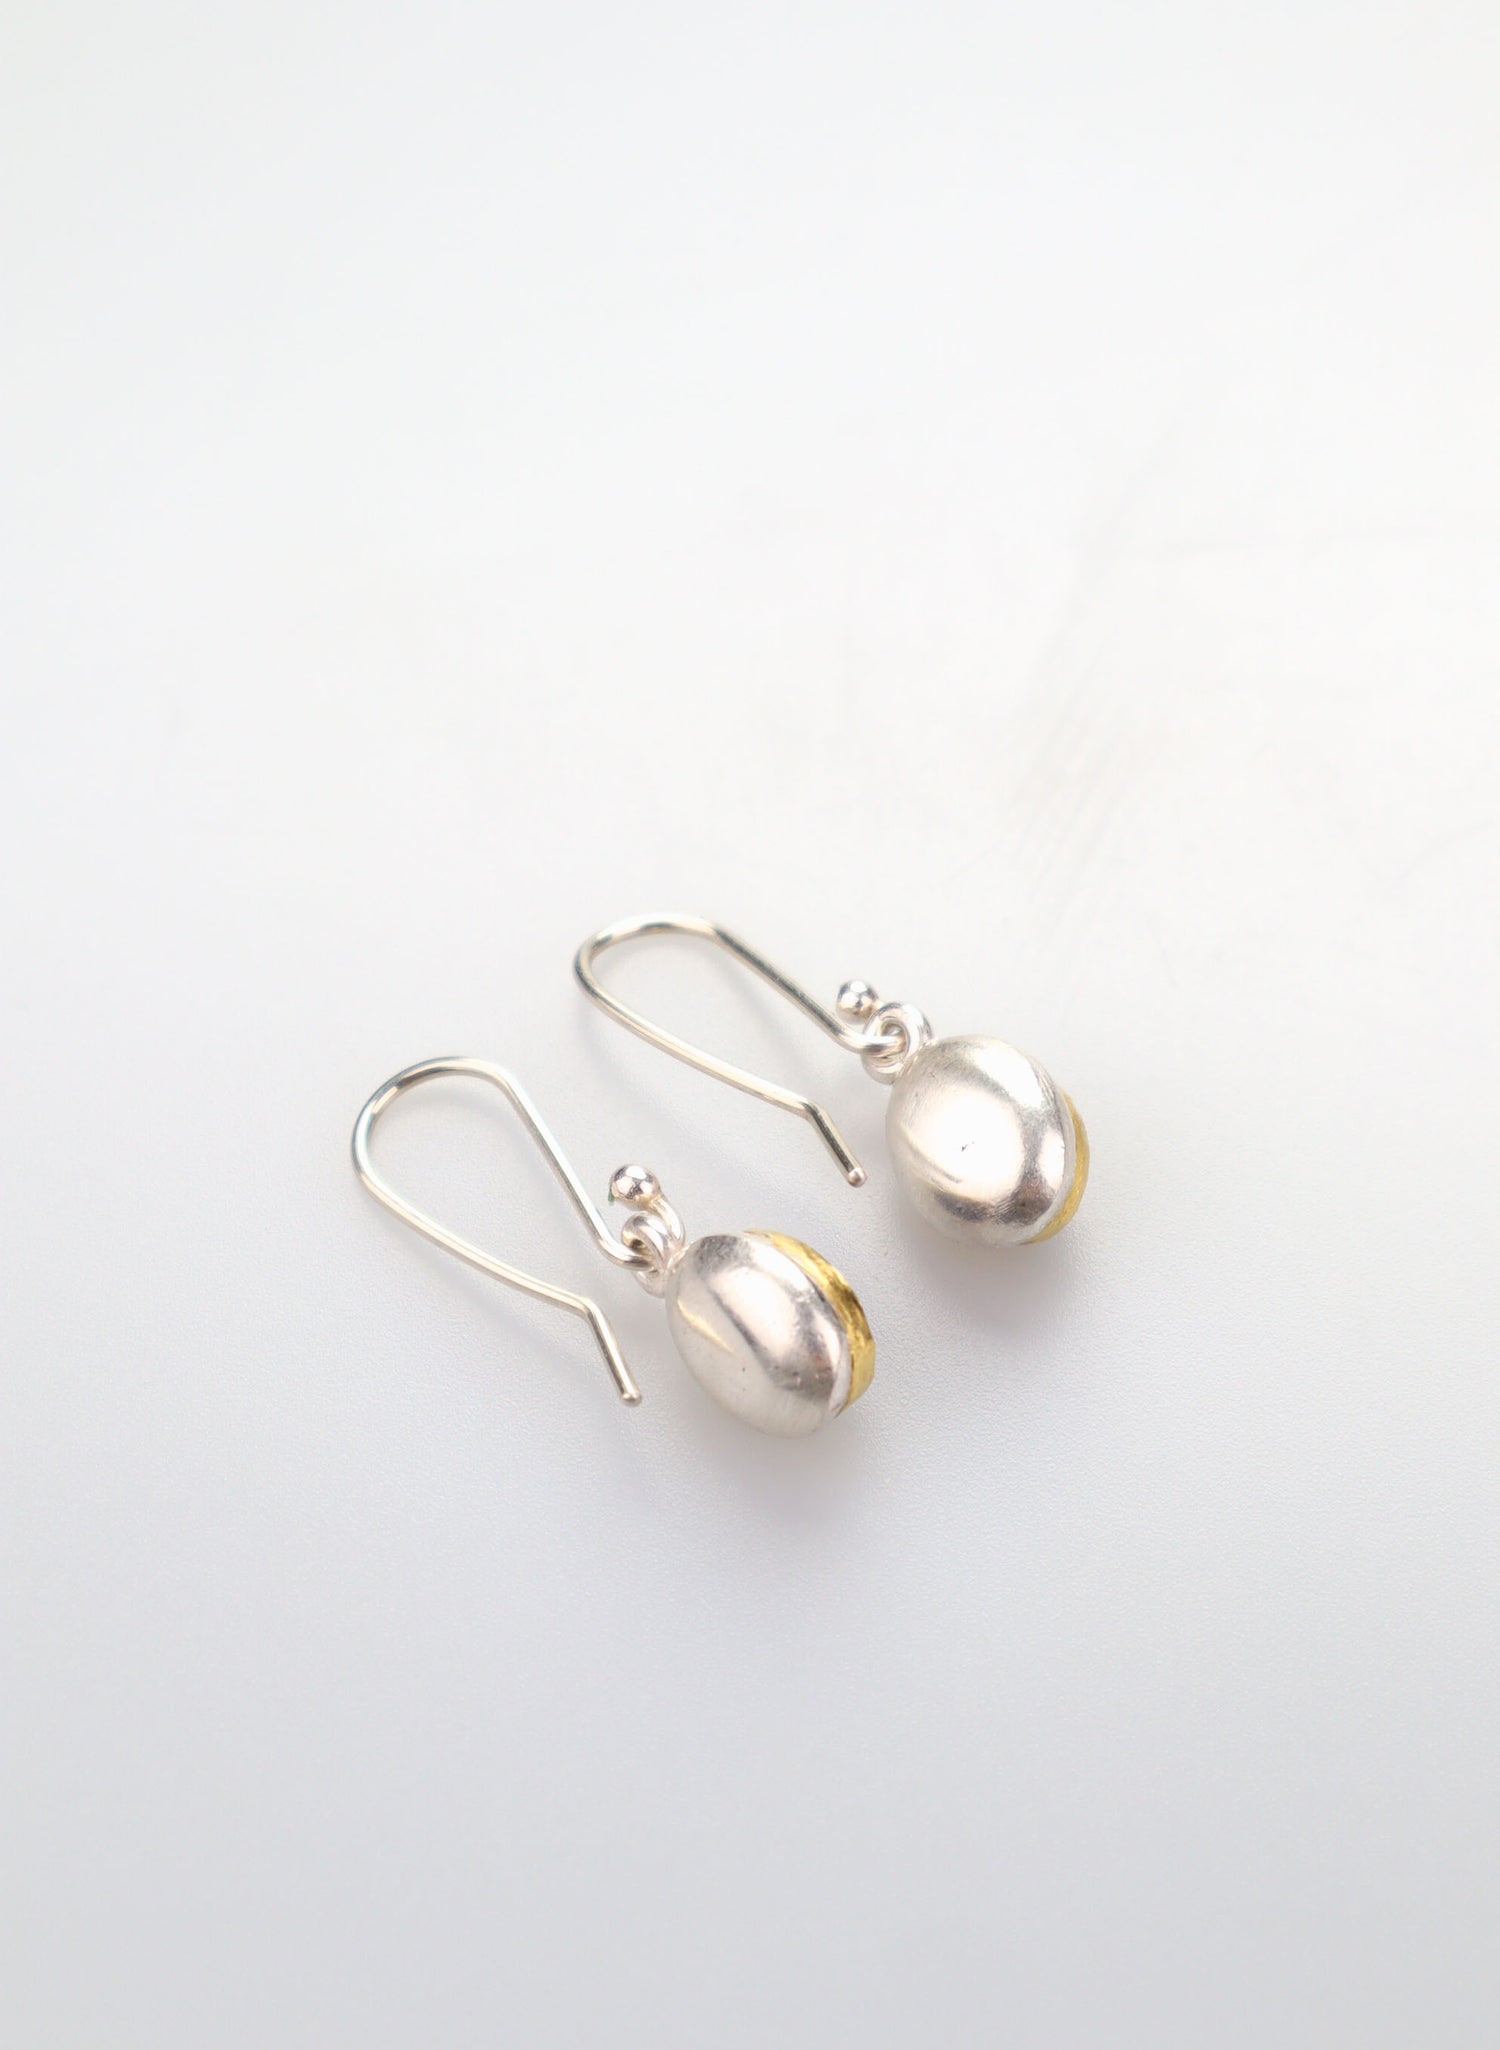 Oval Iolite Drop Earrings - Sterling Silver and 22ct Gold